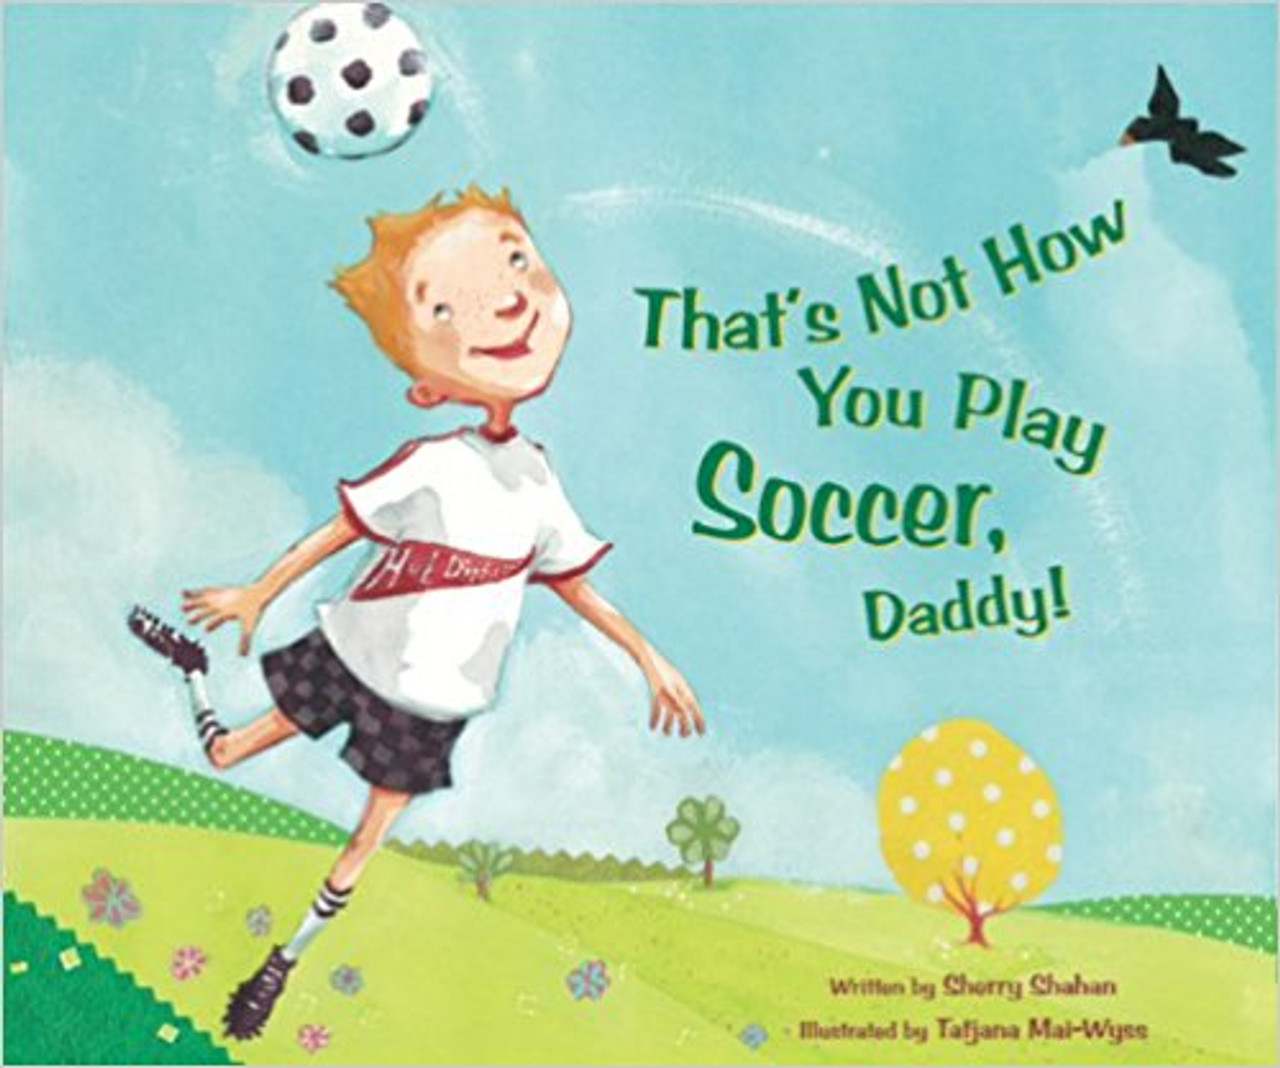 That's Not How You Play Soccer, Daddy! by Sherry Shaham